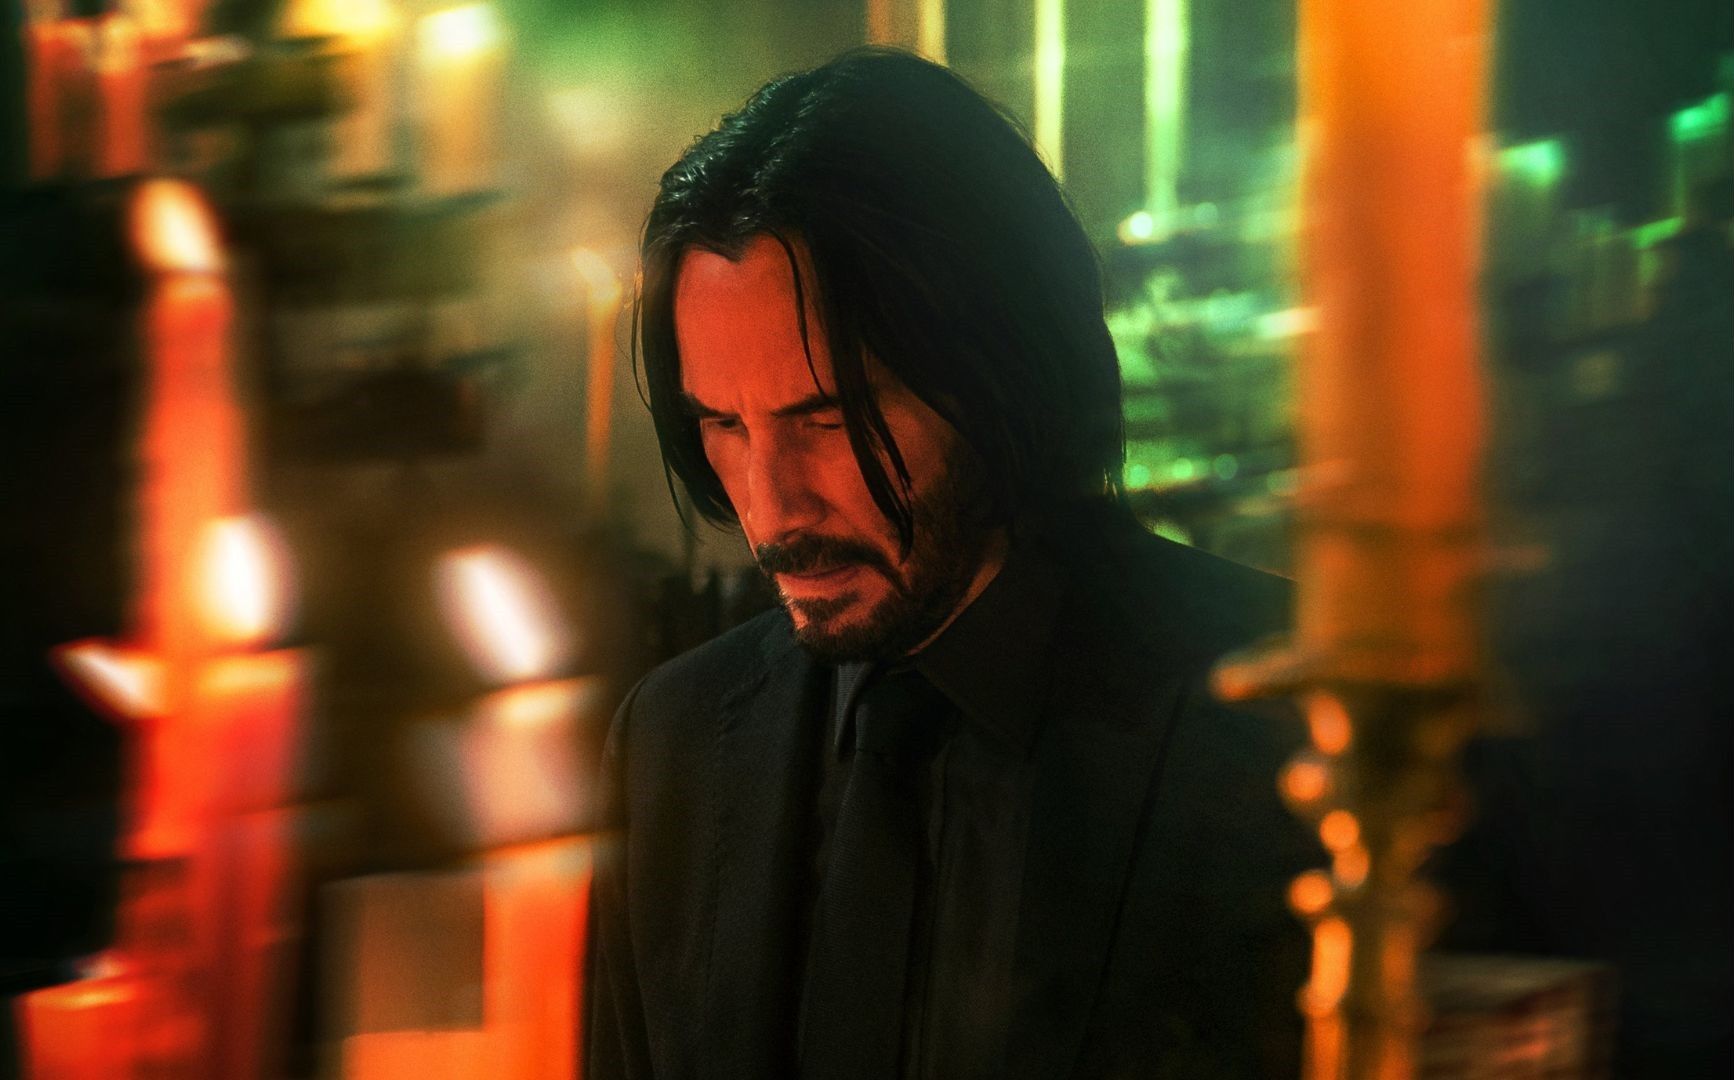 Keanu Reeves is back for more action in 'John Wick 4' teaser